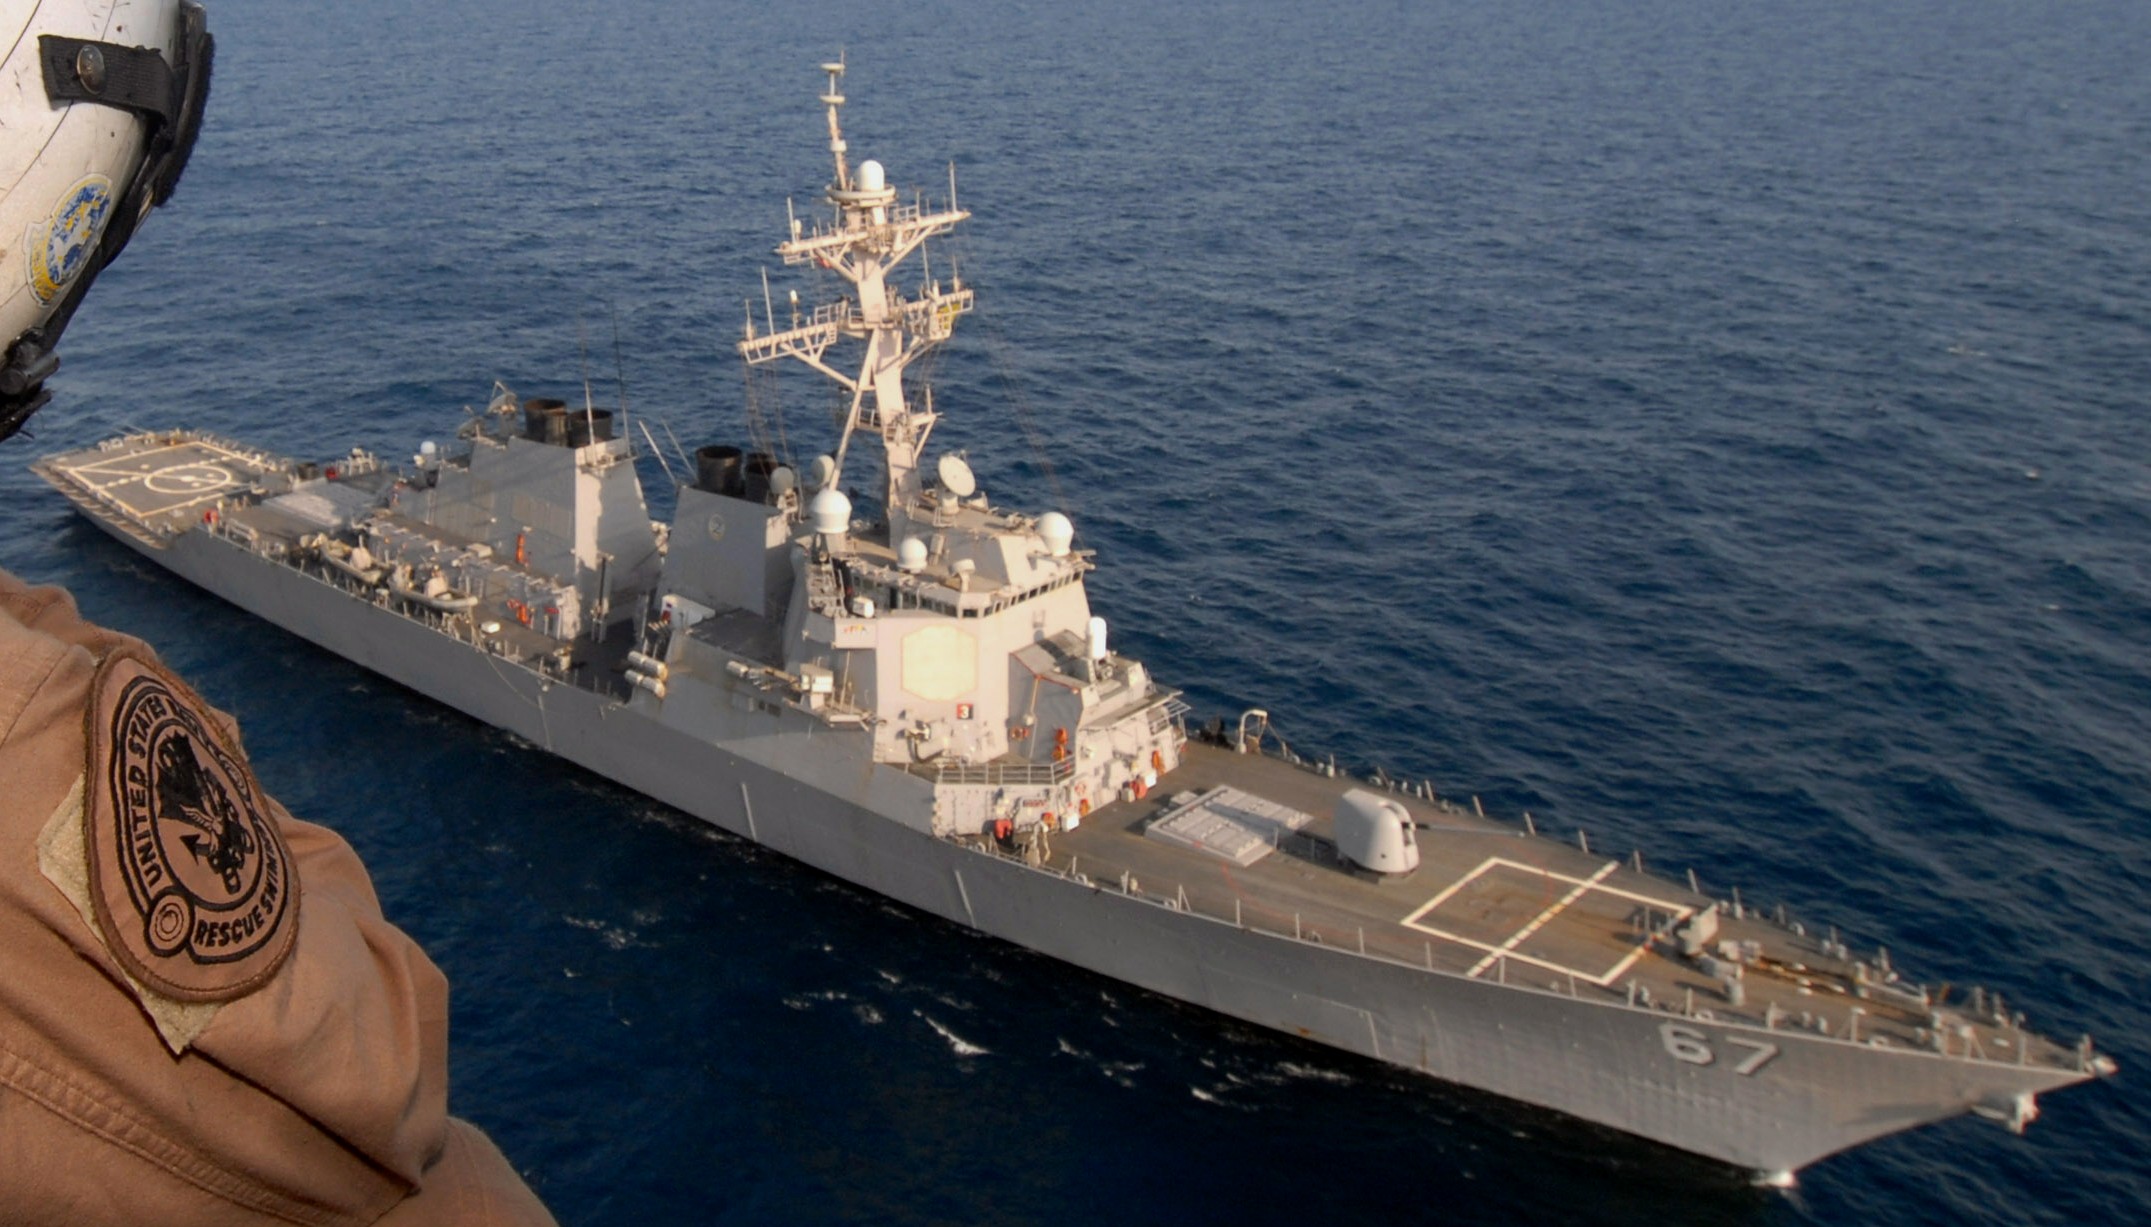 ddg-67 uss cole guided missile destroyer arleigh burke class navy aegis 32